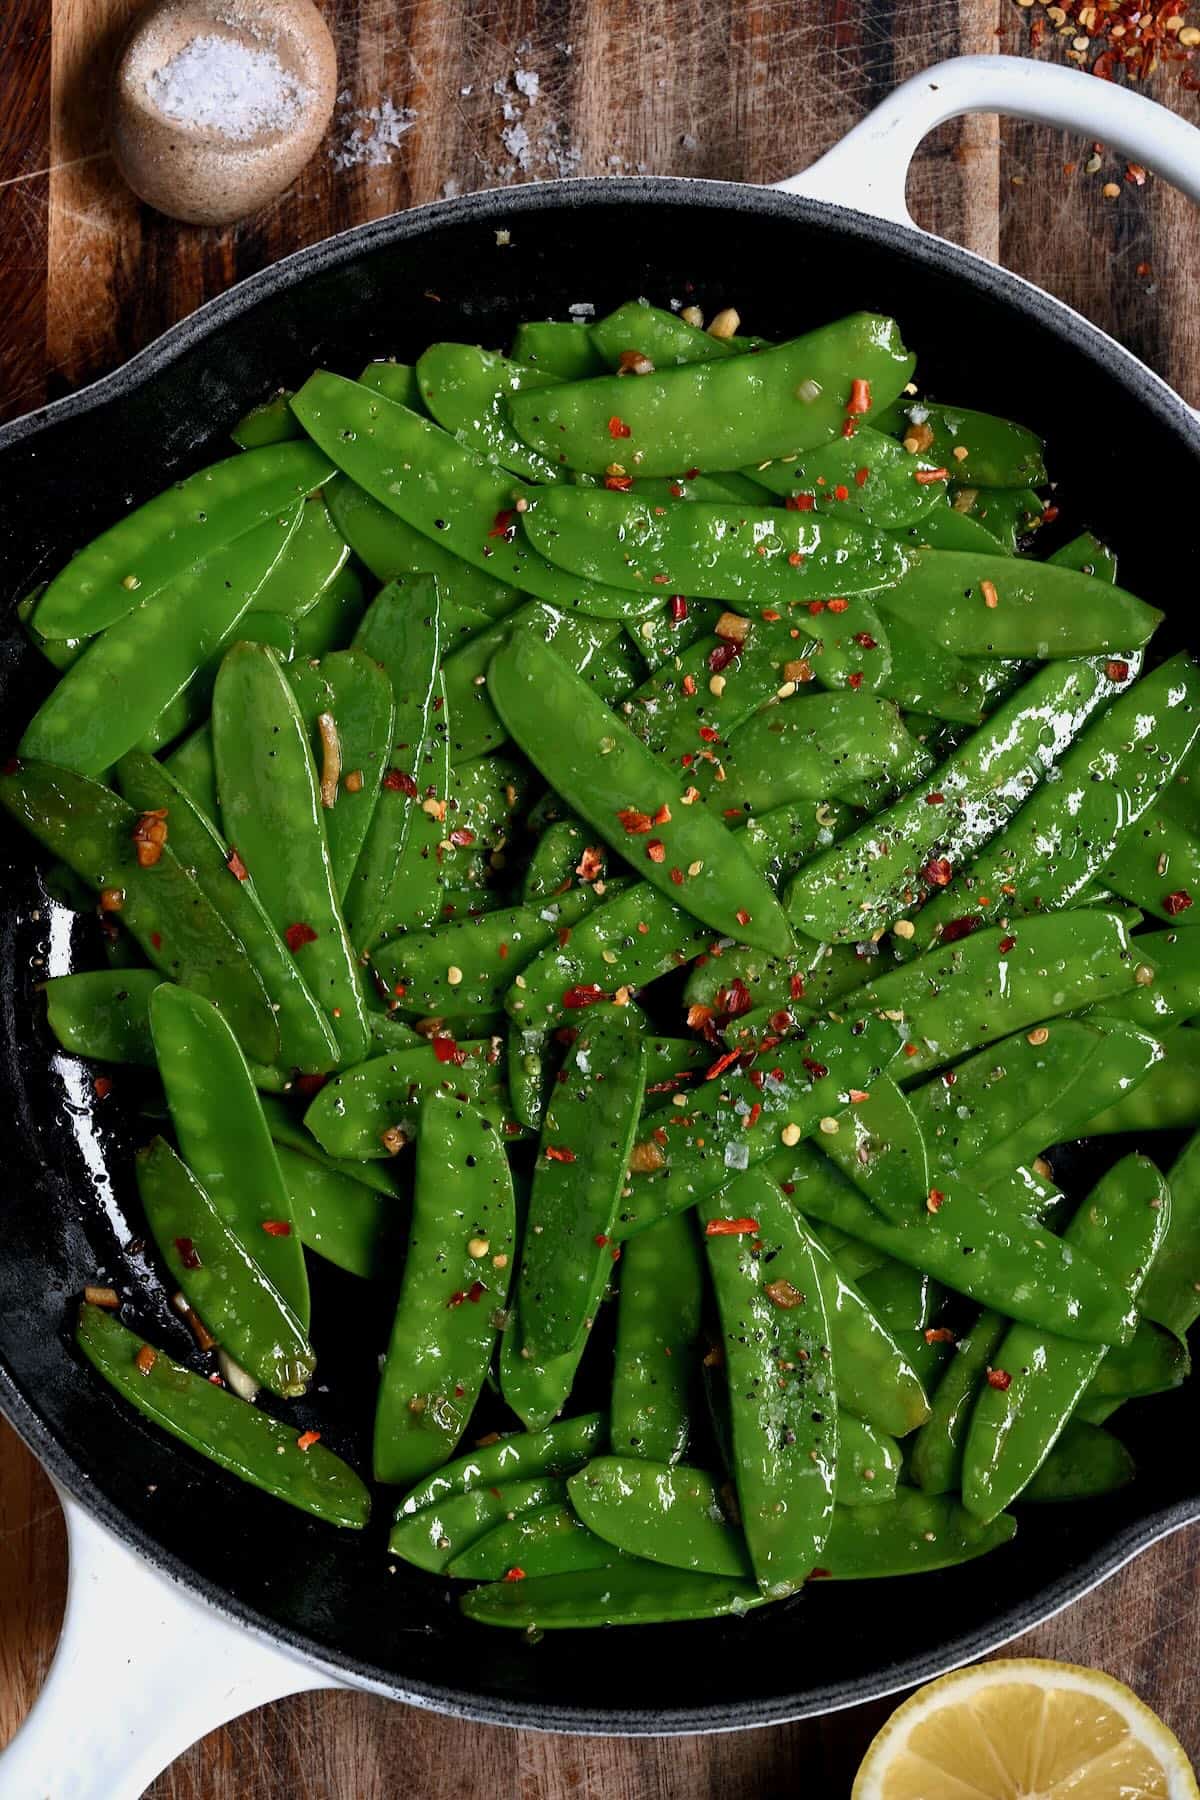 Sauteed snow peas in a skillet